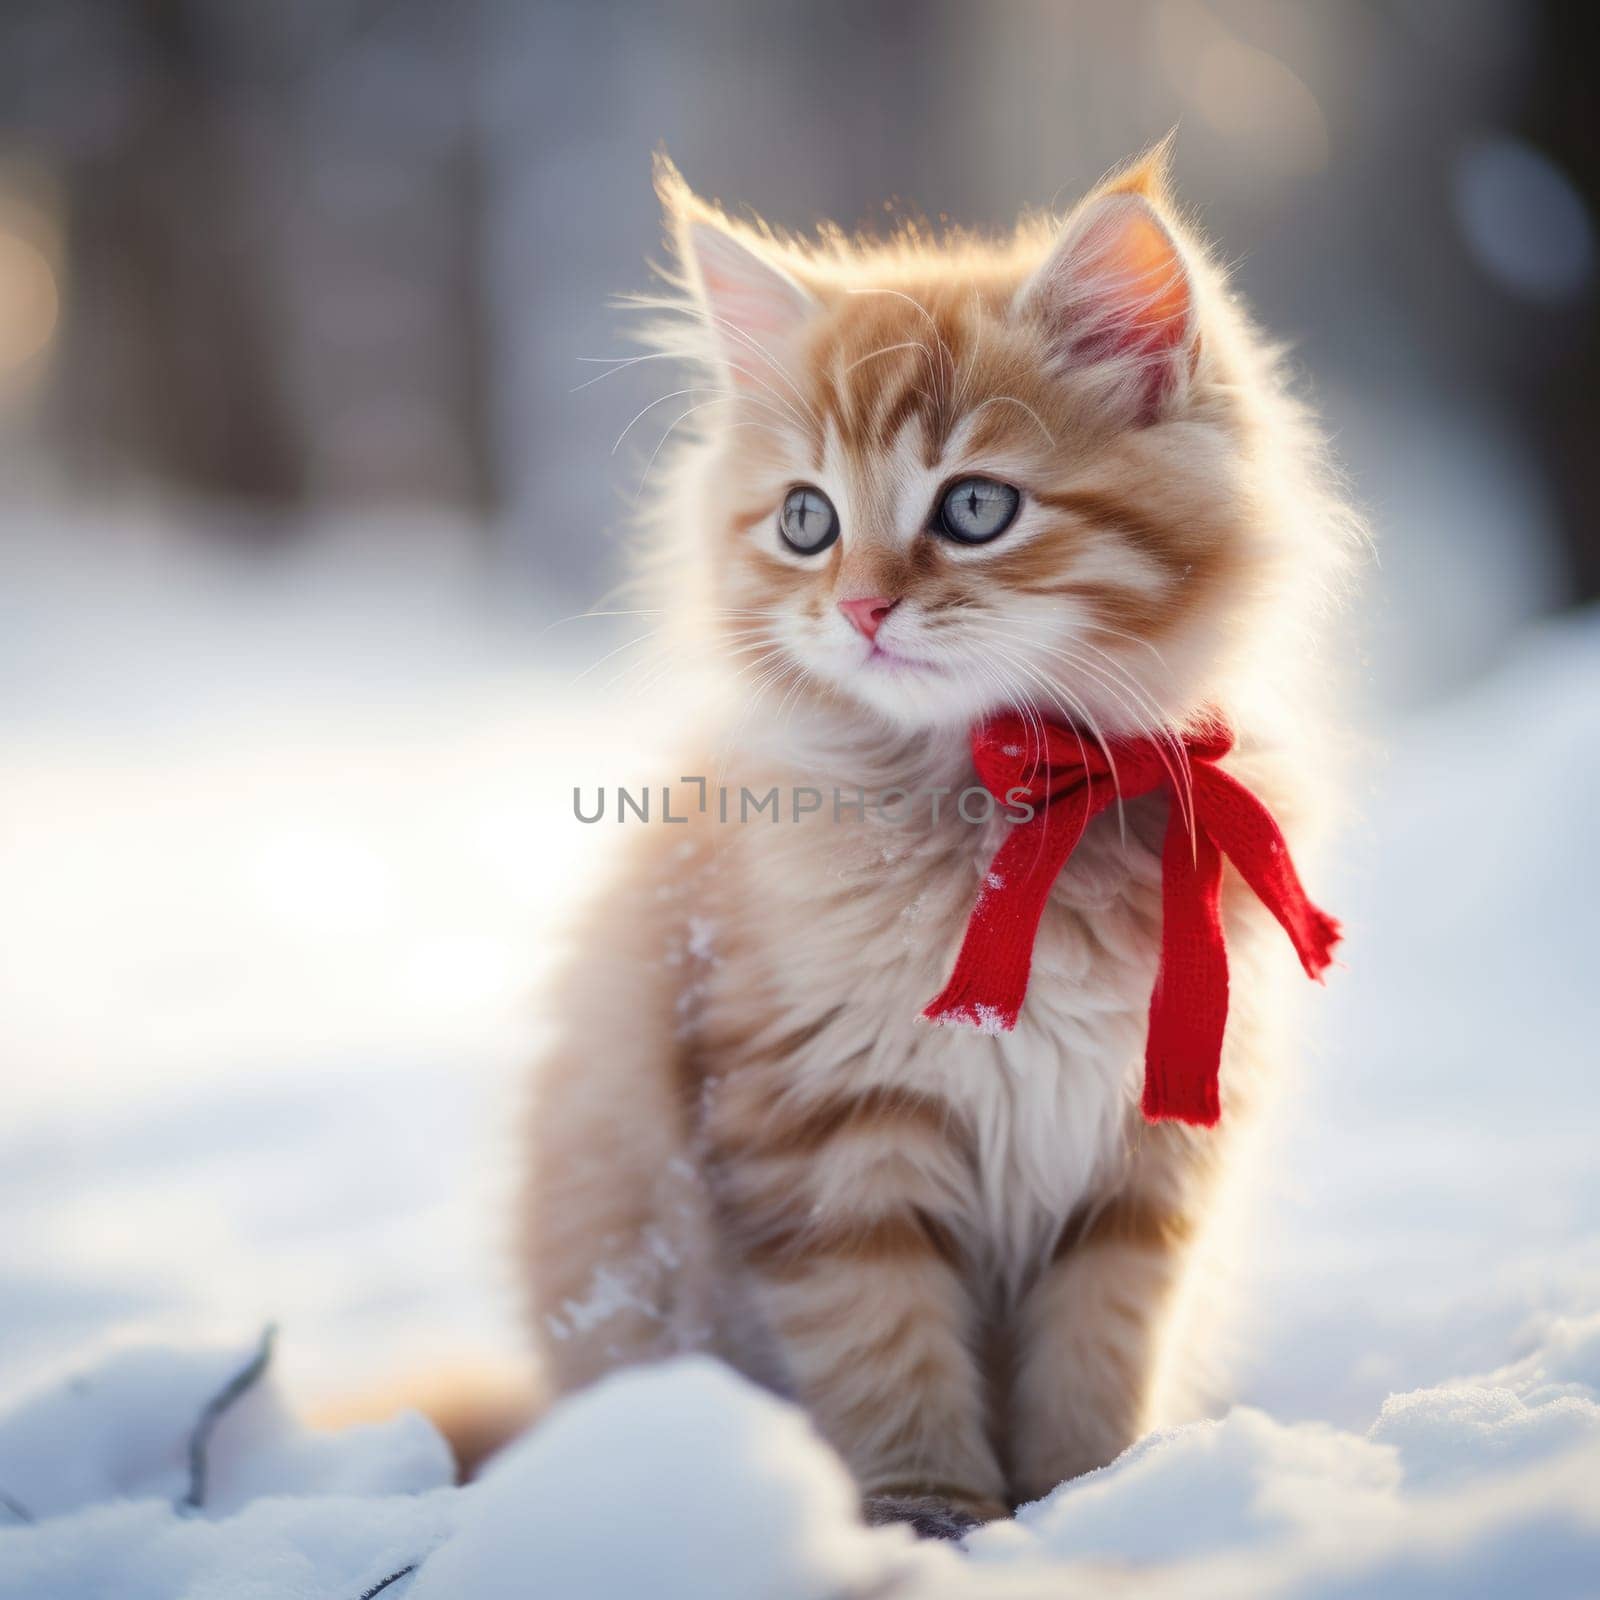 A kitten with a red bow sitting in the snow, AI by starush